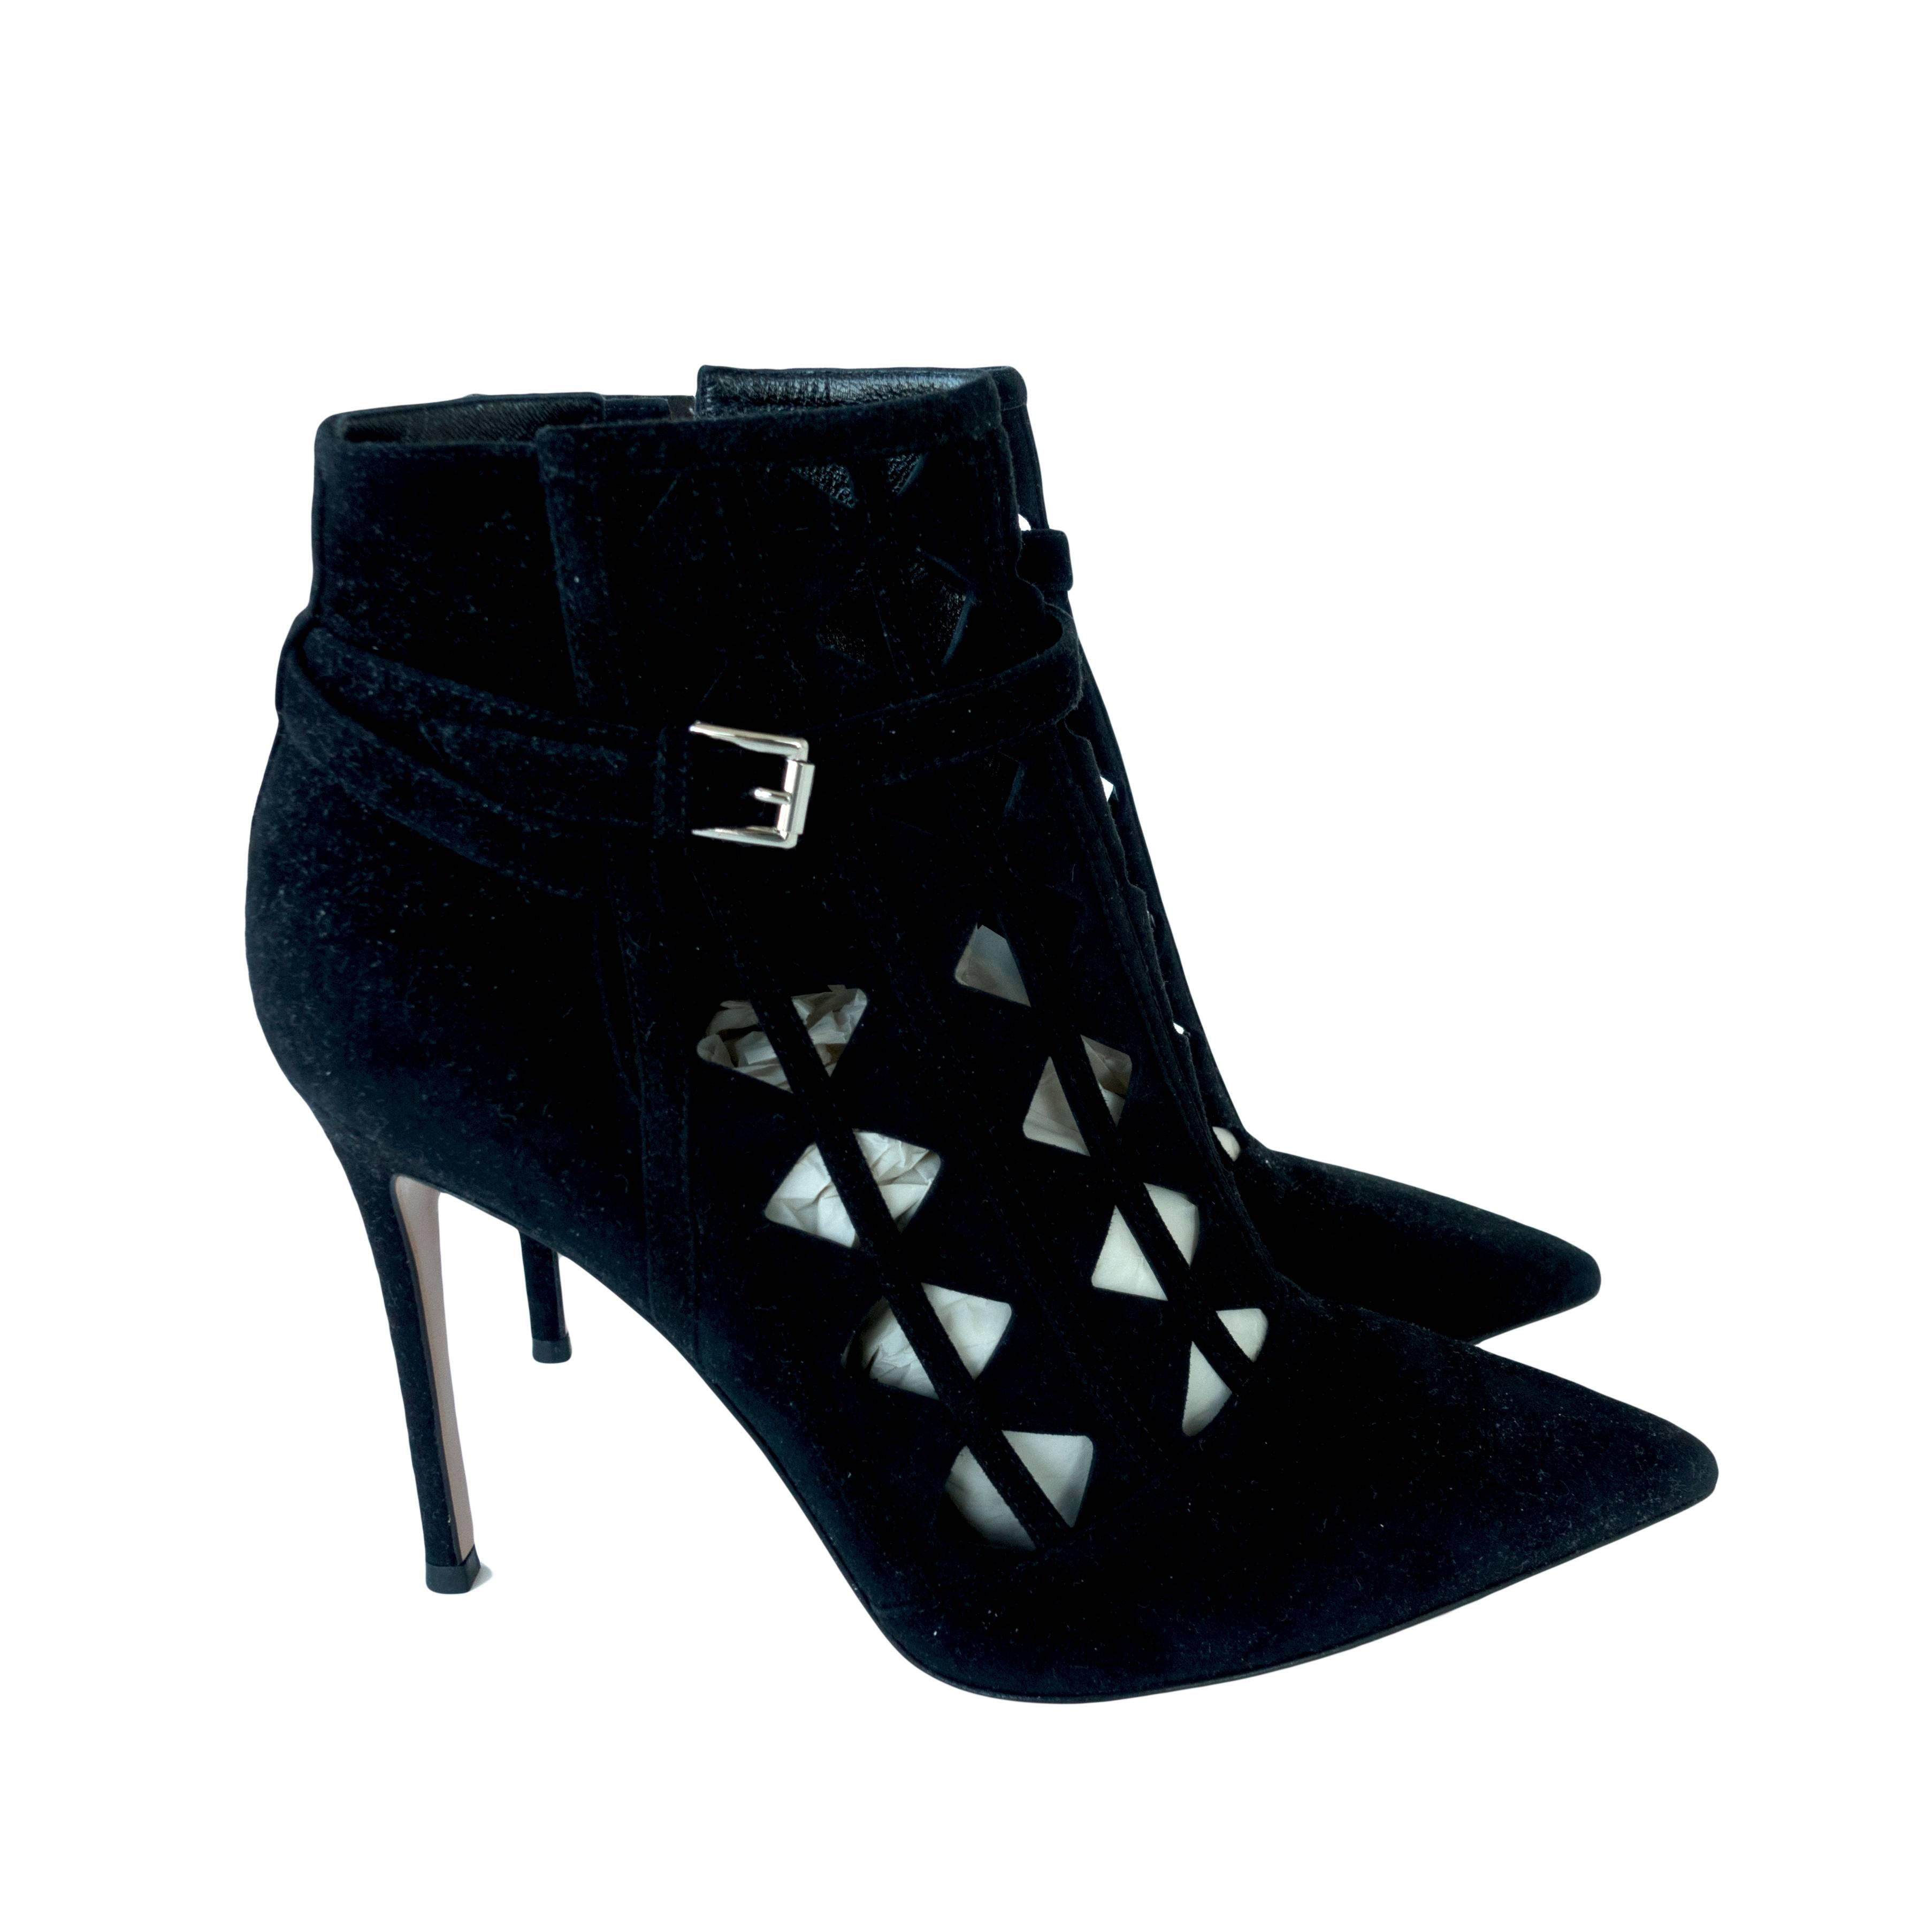 Gianvito Rossi Cutout Black Suede High Ankle Bootie Chic
Brand New in Box.
Comes with Gianvito Rossi shoe box and sleepers.
Gianvito Rossi is de rigueur among the fashion cognoscenti!
These suede high ankle booties are so fabulous with its sexy